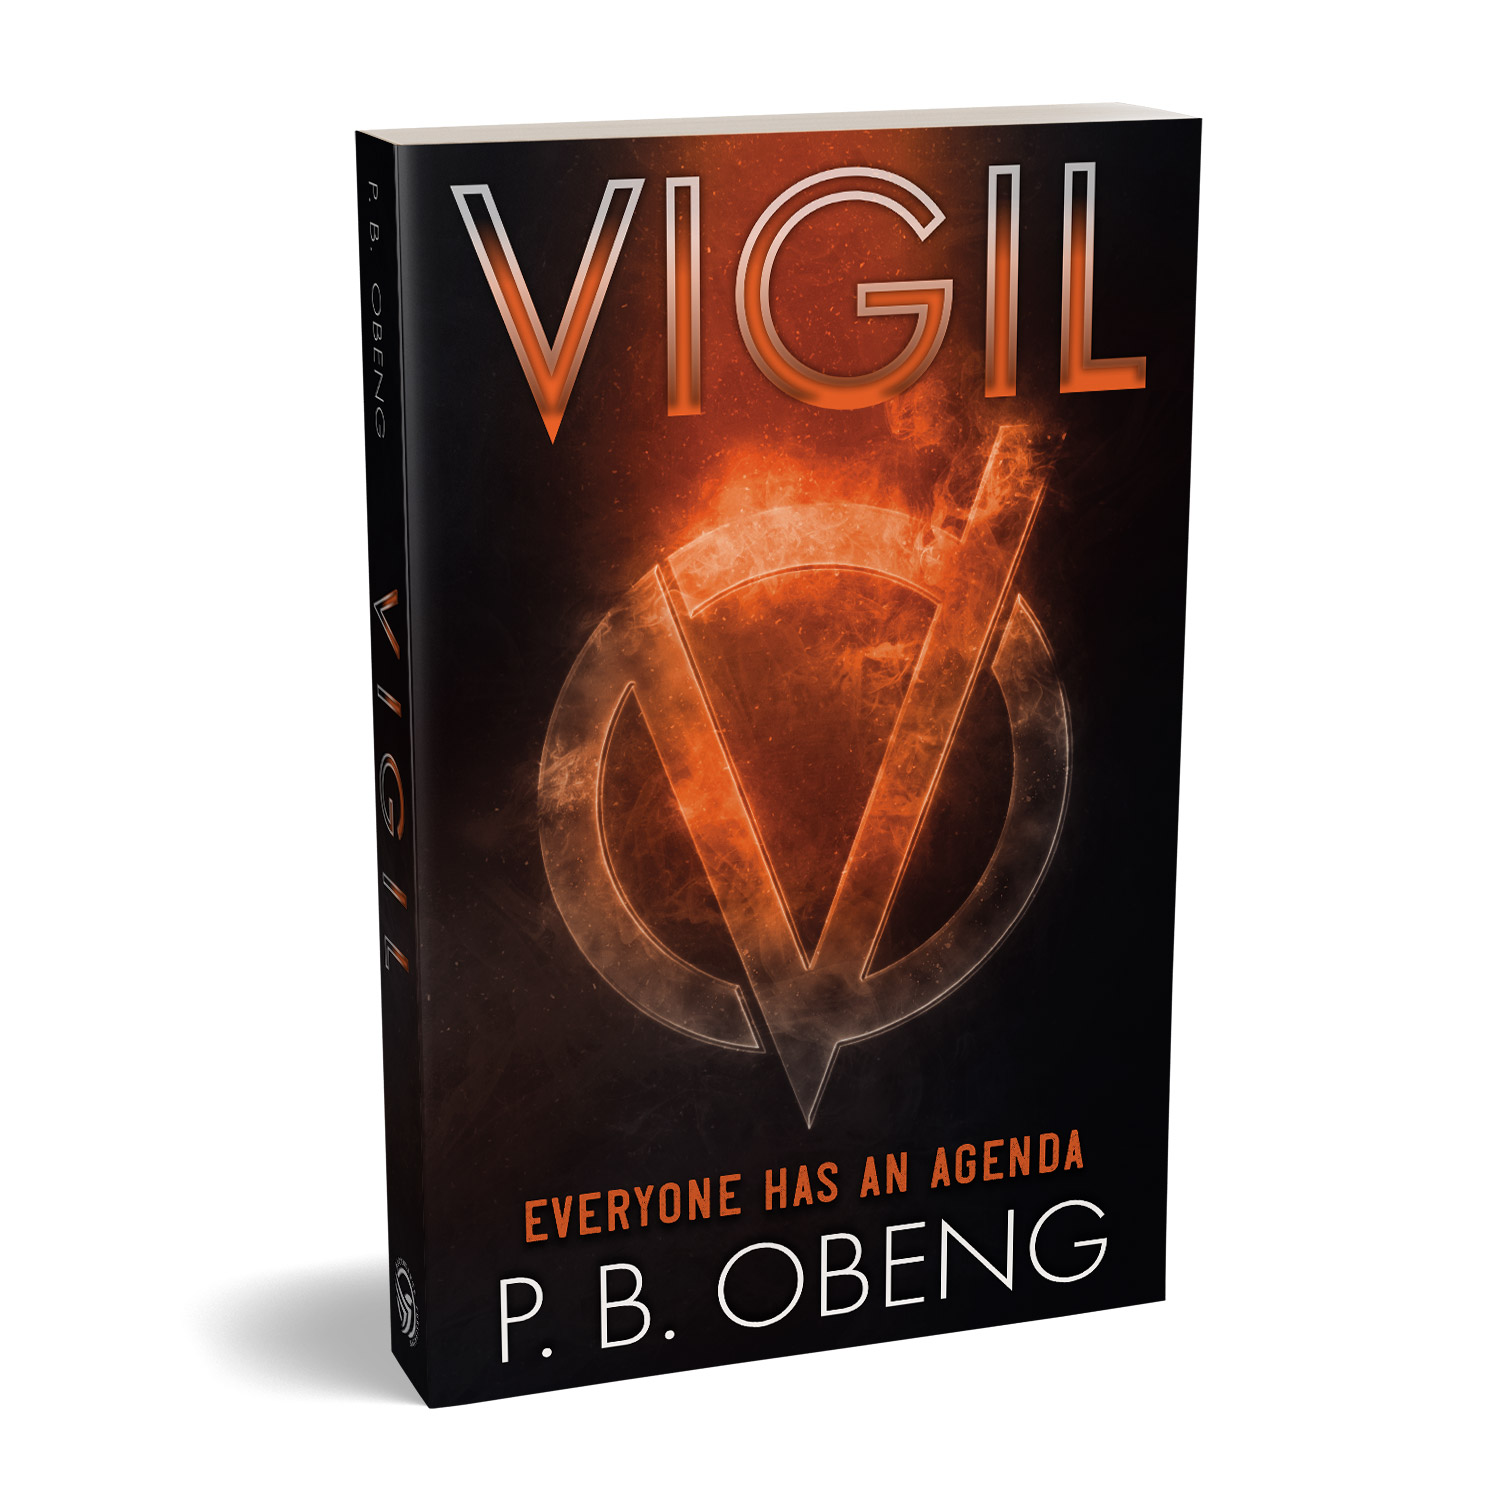 'Vigil' is a superhero-powered sci-fi, by P B Obeng. The book cover and interior were designed by Mark Thomas, of coverness.com. To find out more about my book design services, please visit www.coverness.com.